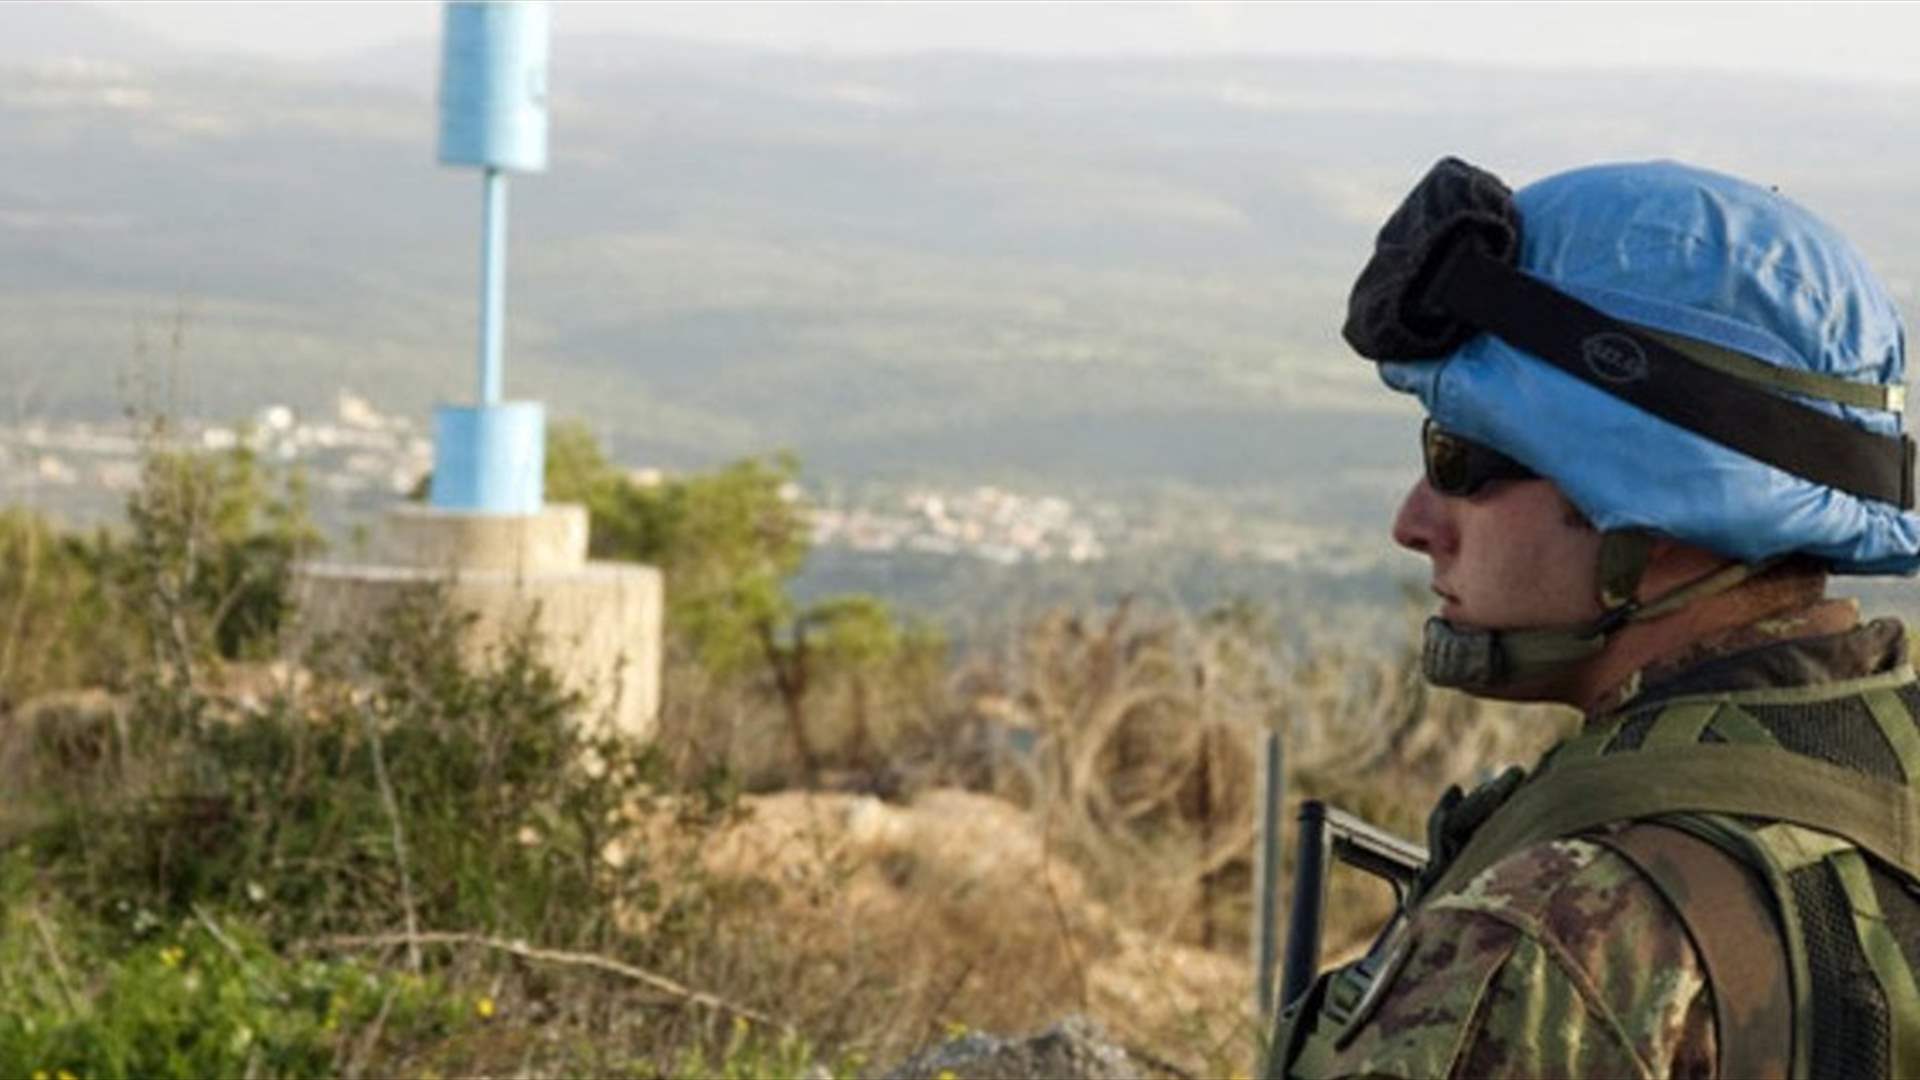 UNIFIL: Violence along the Blue Line could lead to severe consequences